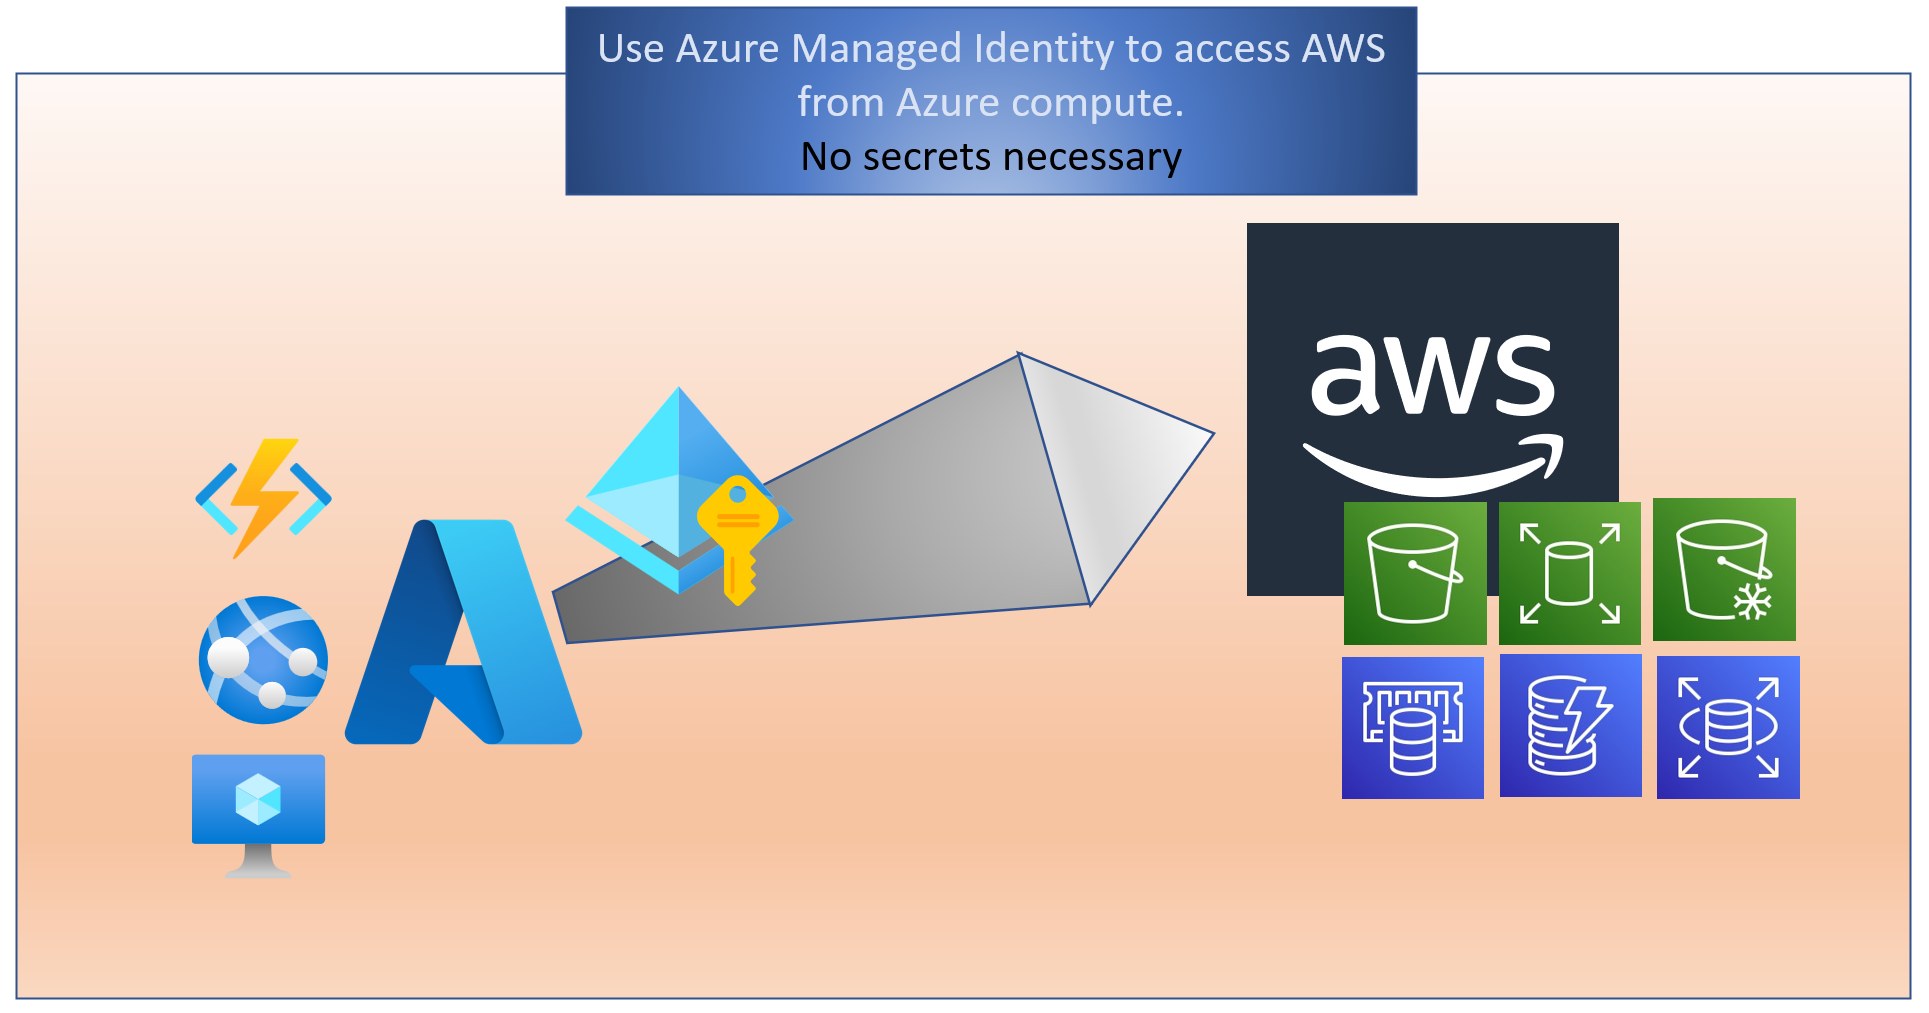 Access AWS from Azure